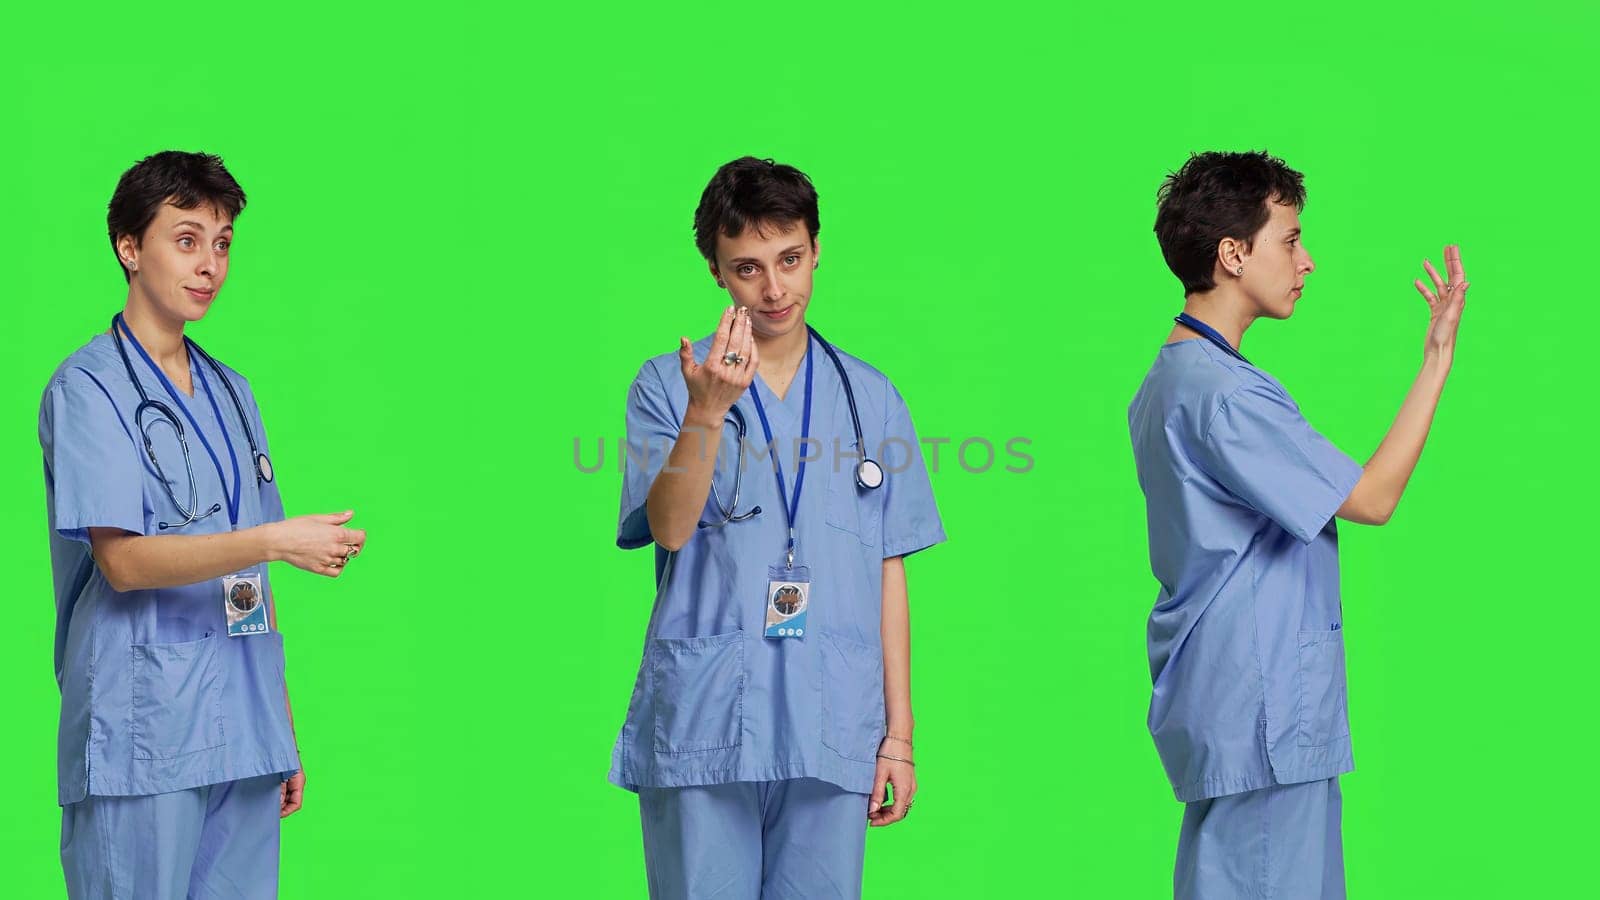 Medical assistant asking a person to come over closer against greenscreen by DCStudio